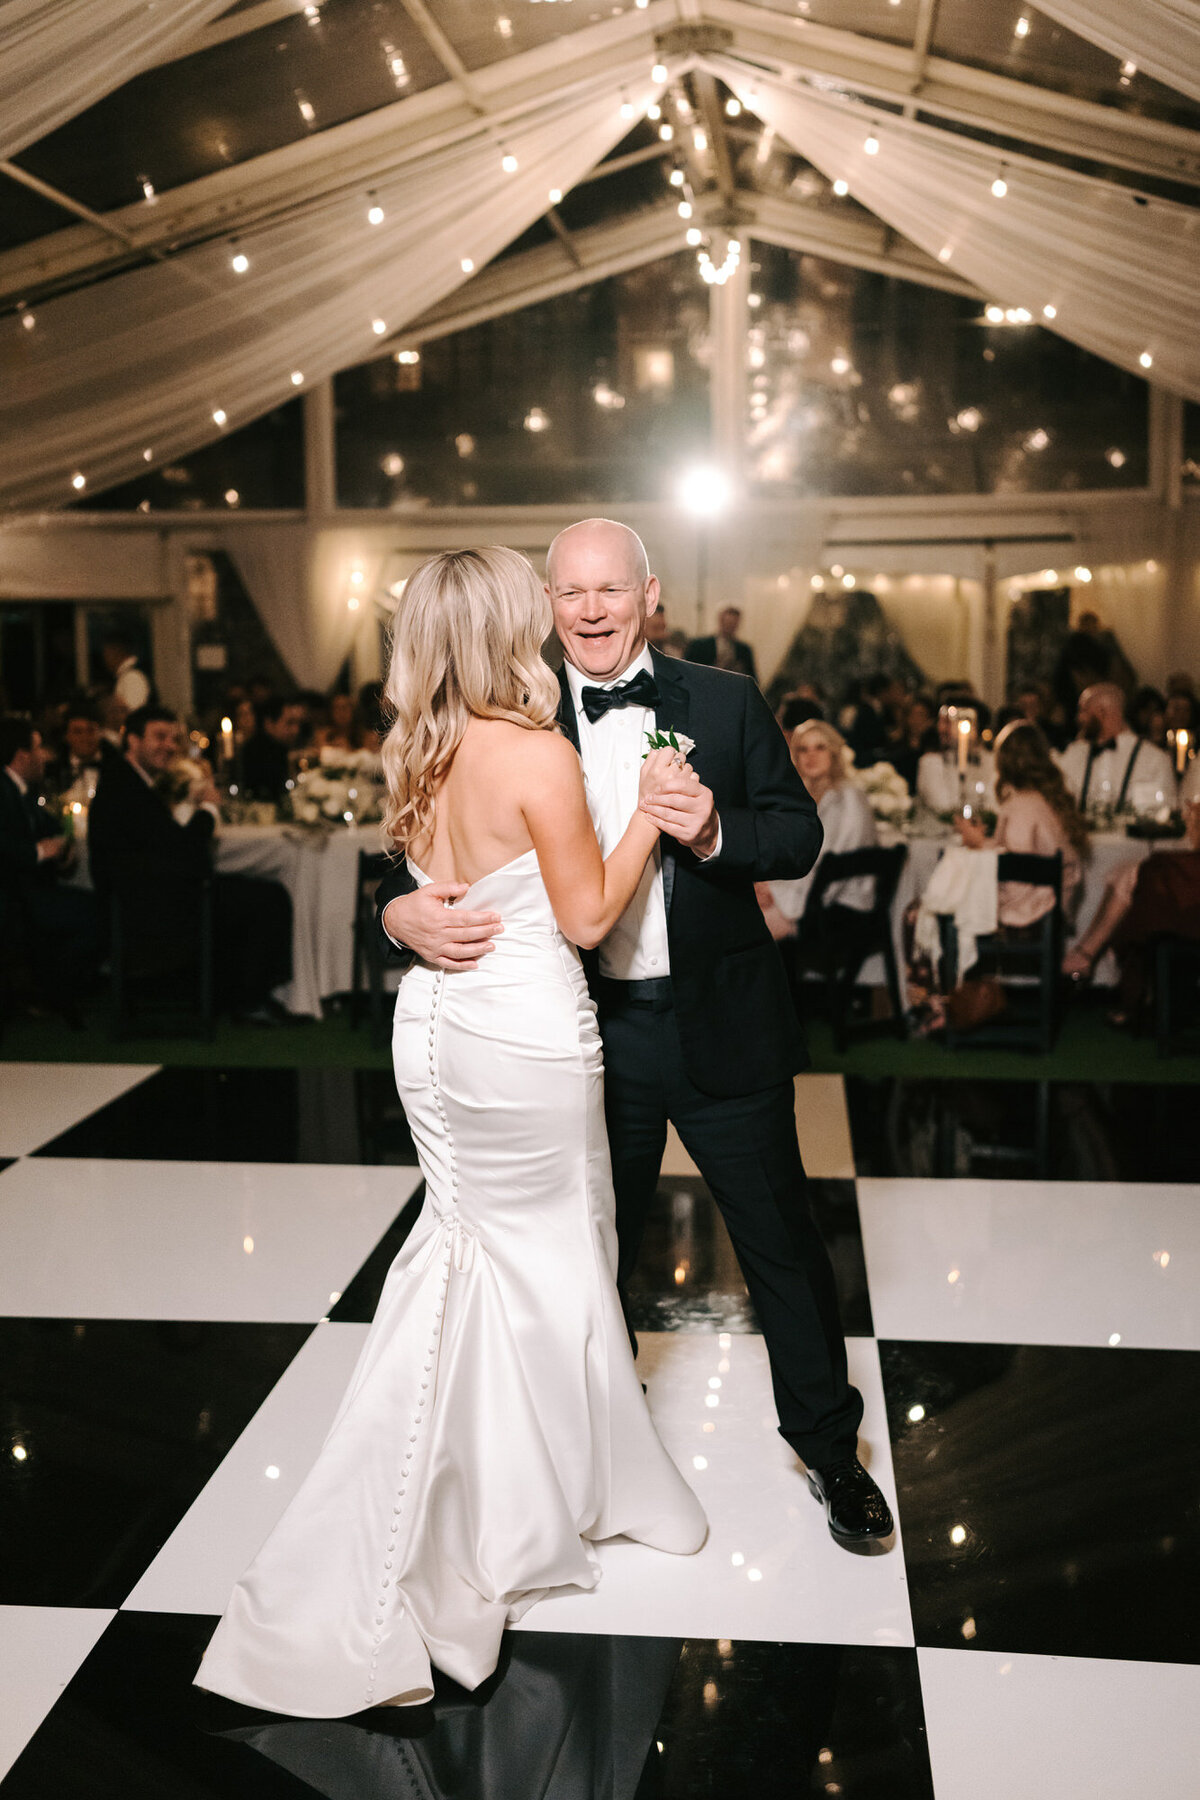 A photograph in color of Claire and her father on her wedding day at Woodbine Mansion in Austin, Texas. The bride and her father are alone on the black and white checkered dance floor. They are in a tent draped in white fabric with cafe lights lighting the room. The father of the bride is facing the camera with a huge smile on his face. It is a full length photo showing the bride’s mermaid style, low back, sleeveless dress and the father of the bride in a black and white tuxedo. Wedding photography by Stacie McChesney/Vitae Weddings.